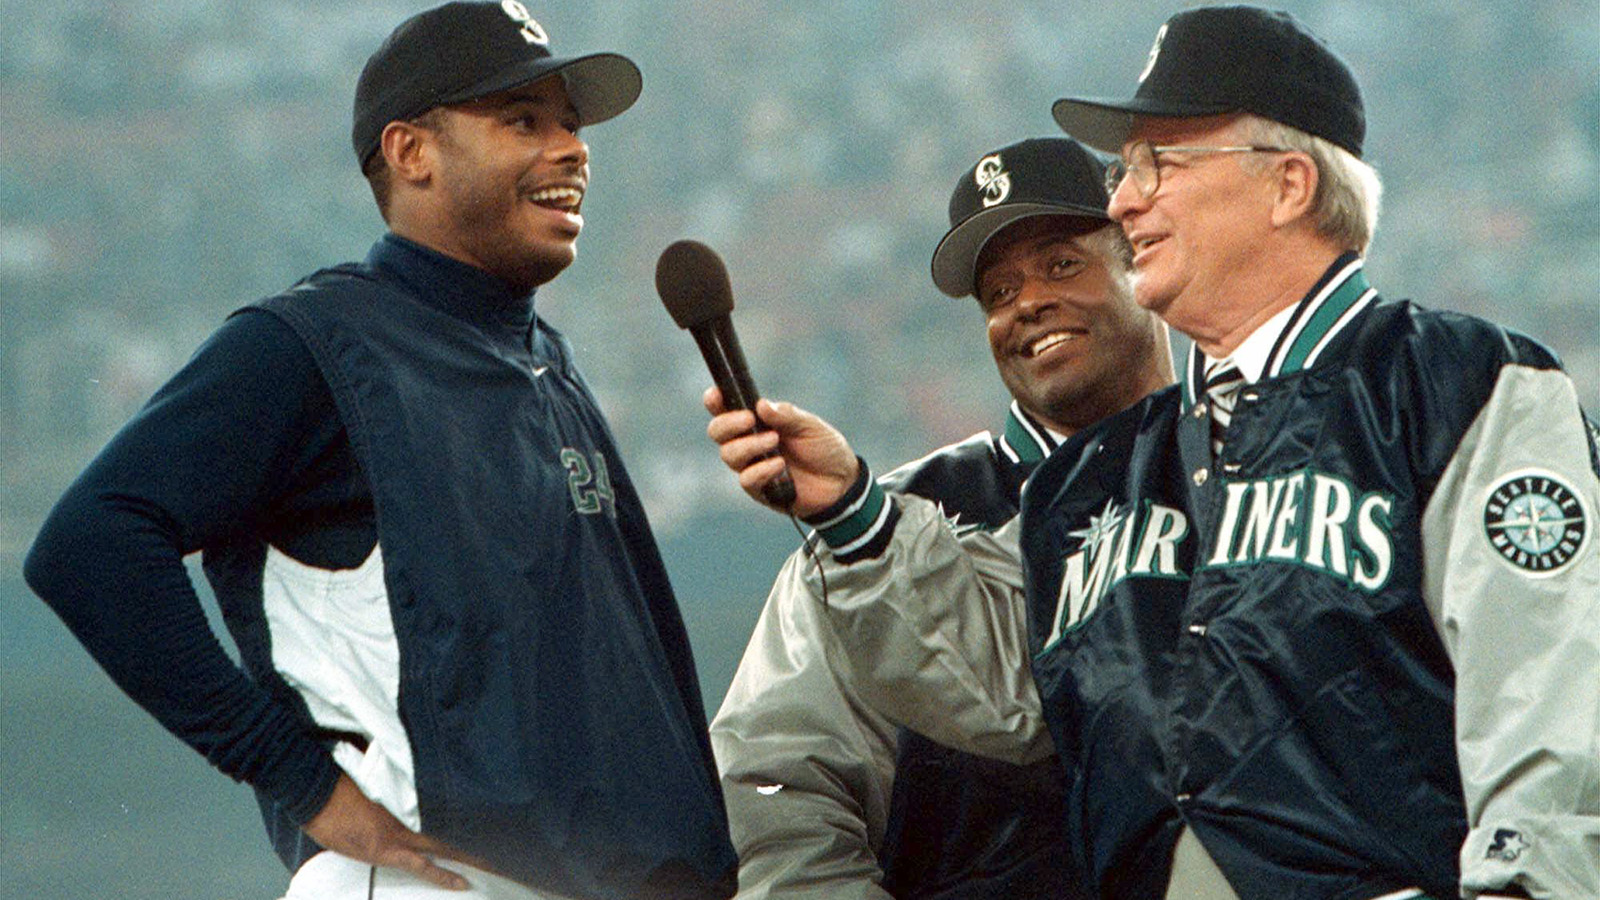 10 times Ken Griffey Jr. invaded pop culture during the '90s